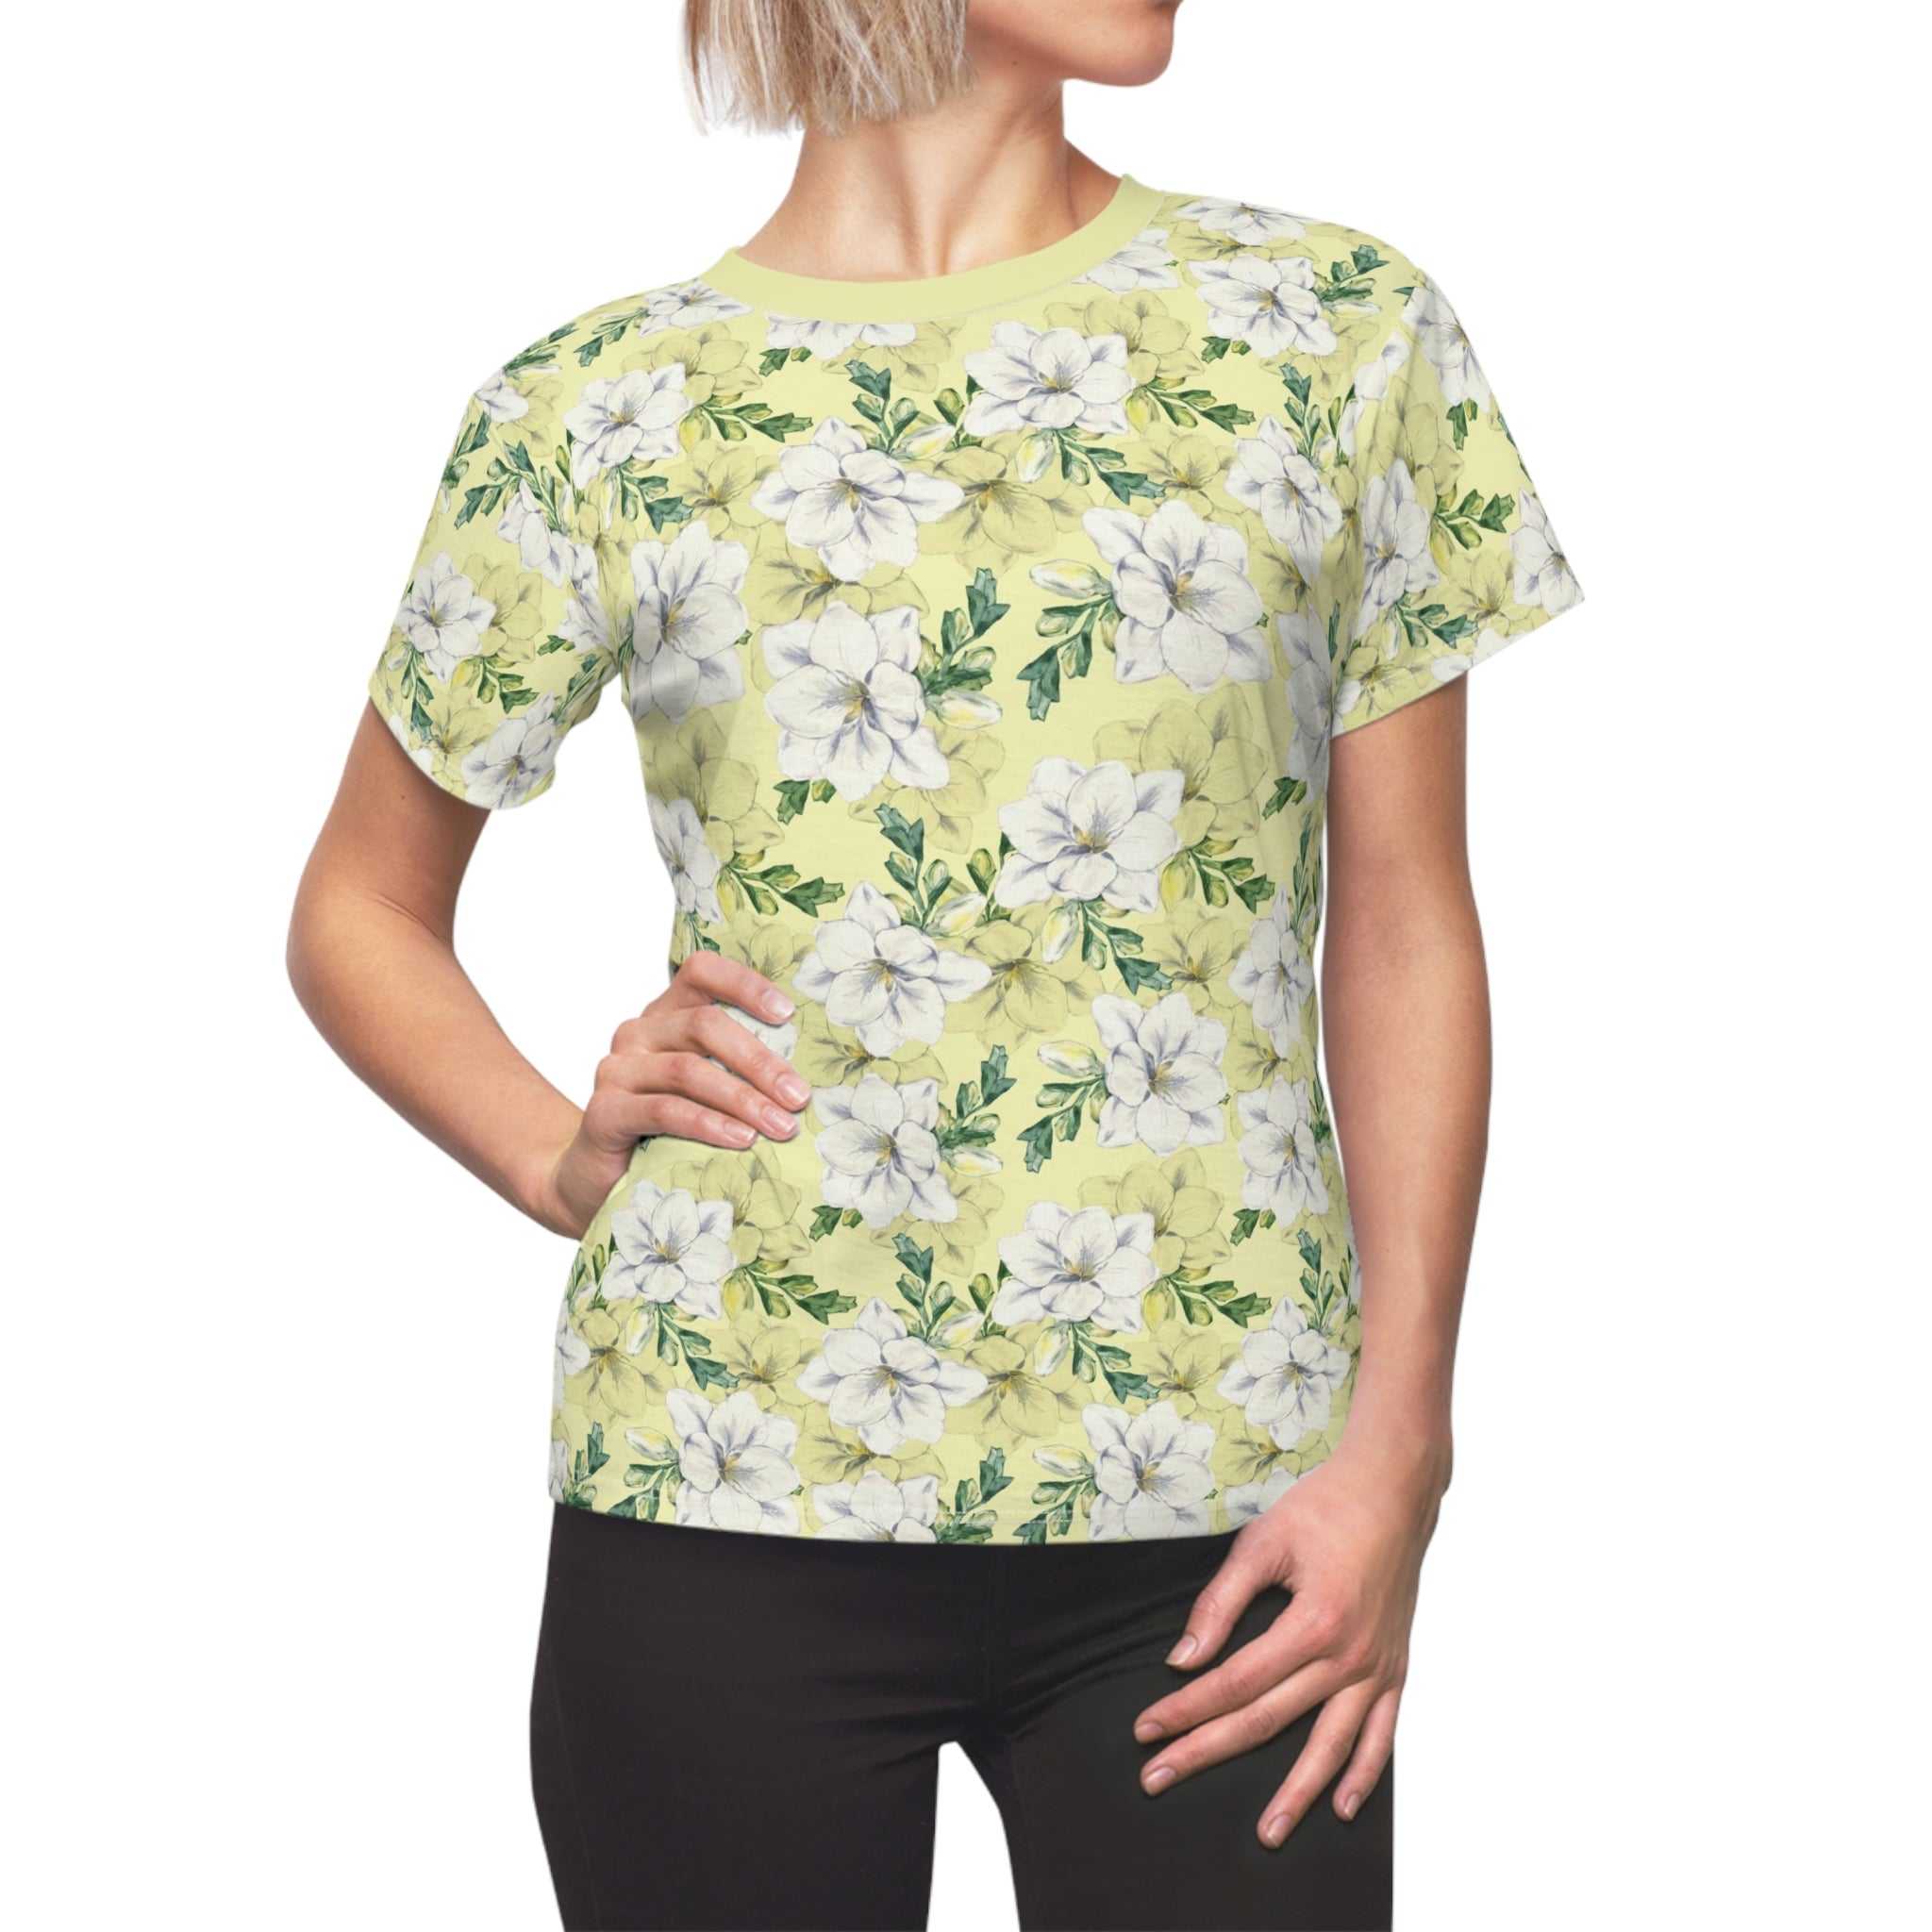 FLORAL LILIES YELLOW - Tee